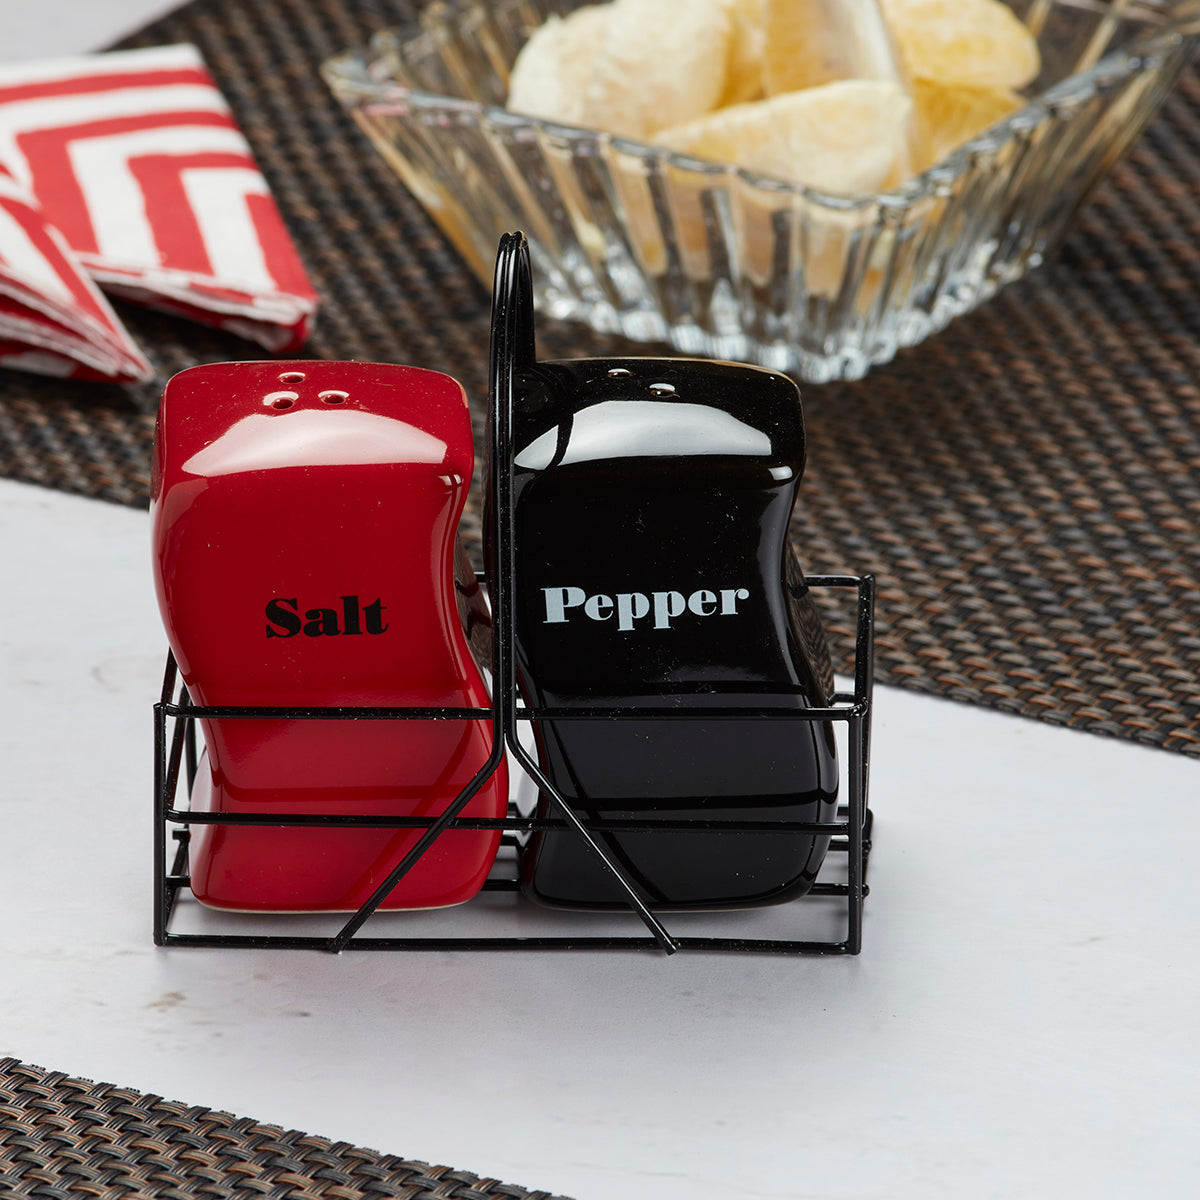 Ceramic Salt and Pepper Shakers Set with tray for Dining Table (10659)